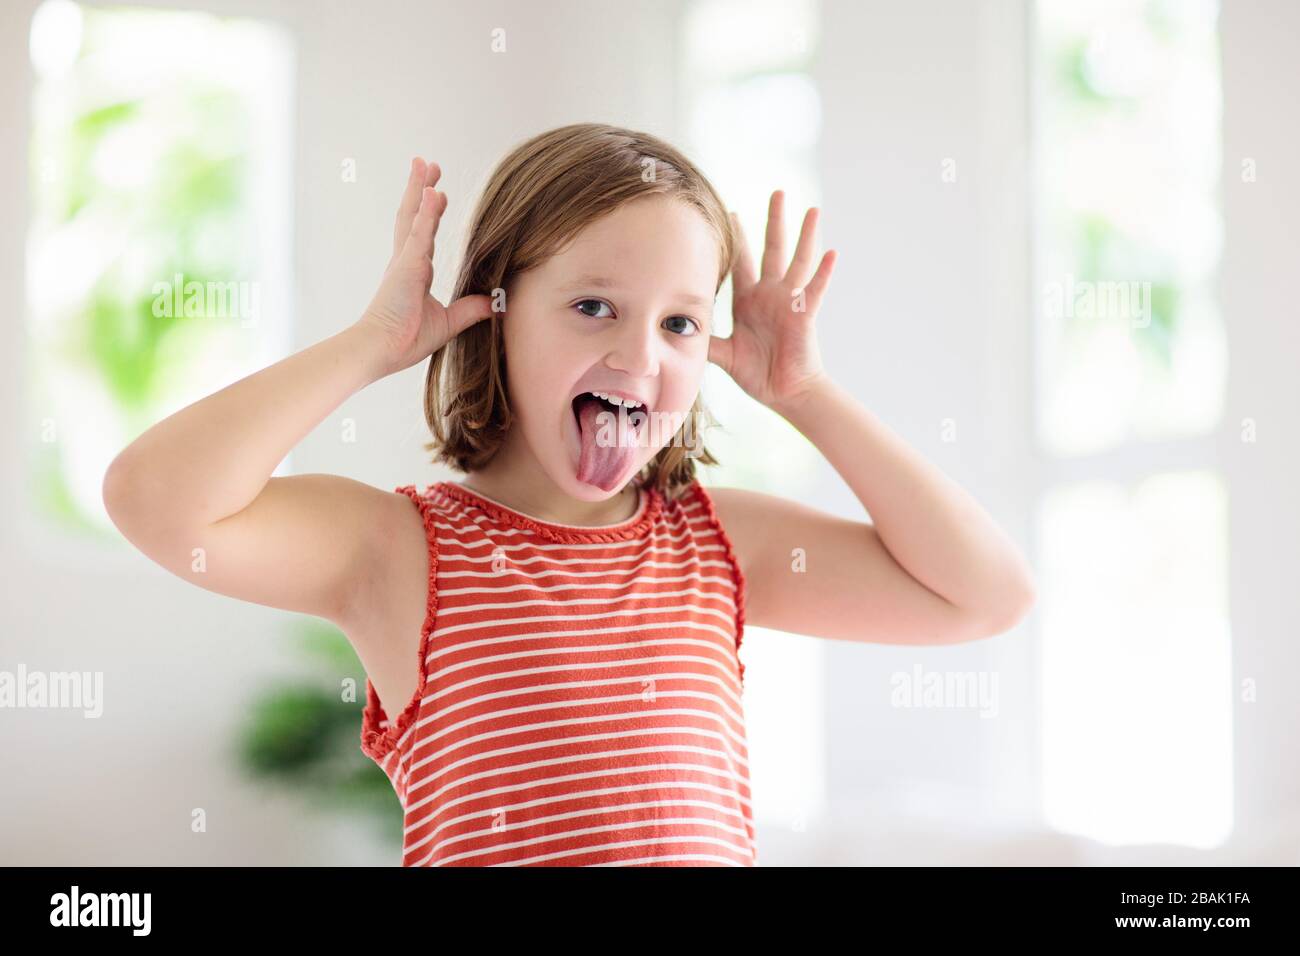 Child making funny face. Kid teasing and laughing. Silly little girl playing and smiling. Stock Photo